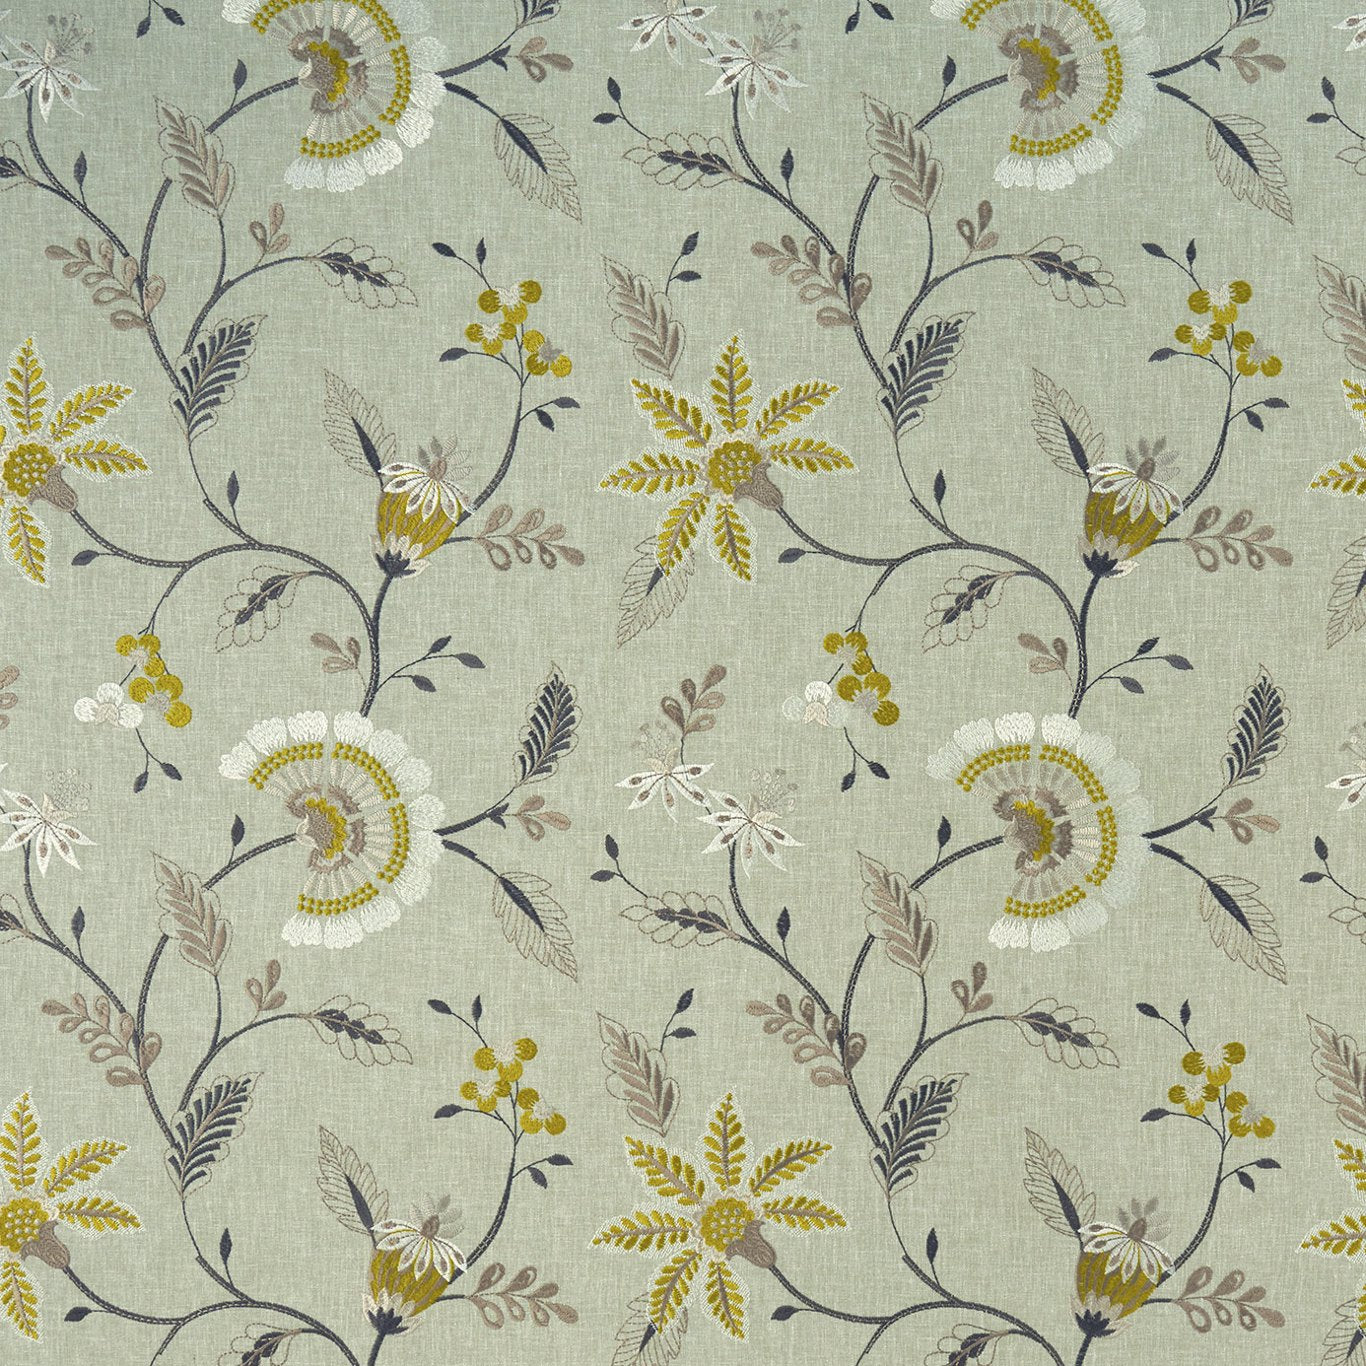 Delamere Fabric by Clarke & Clarke - F1004/01 - Chartreuse